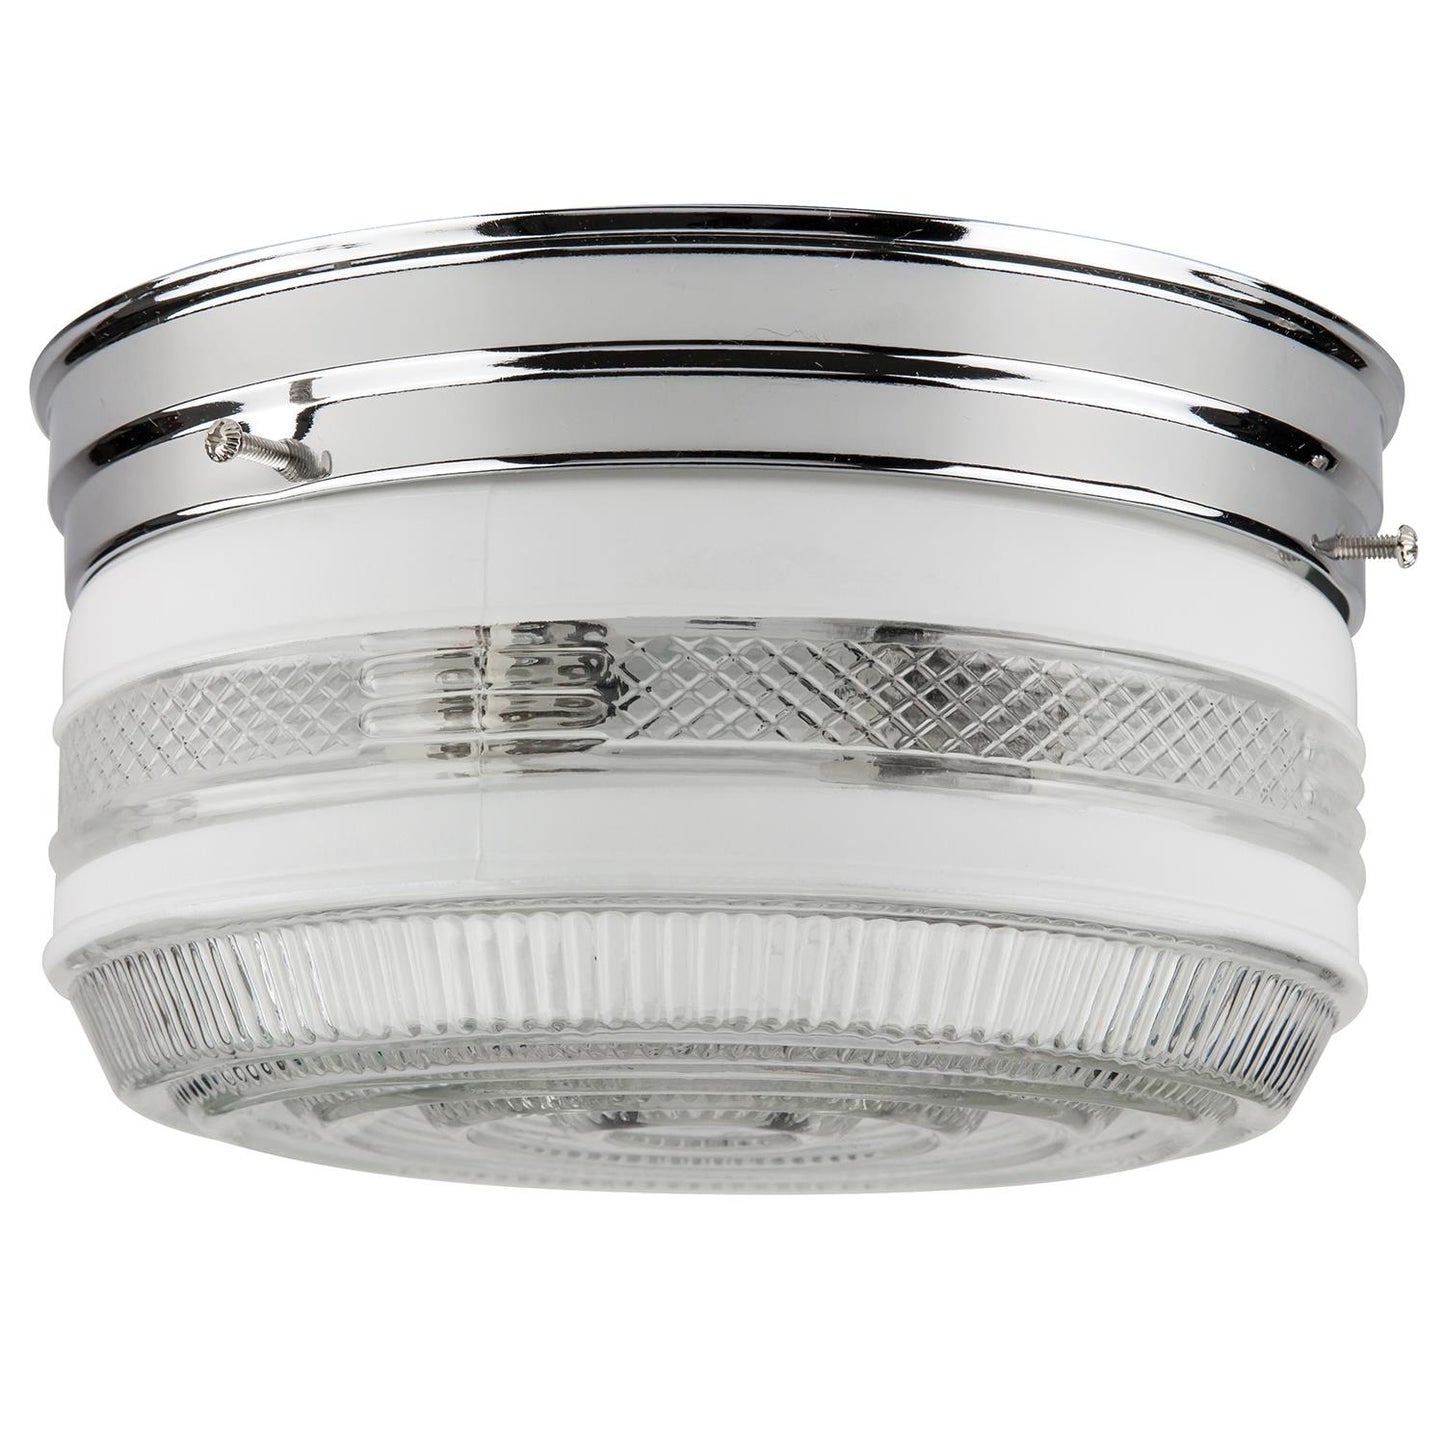 Sunlite 8" Drum Ceiling Fixture, Chrome Finish, Semi-Frosted Glass